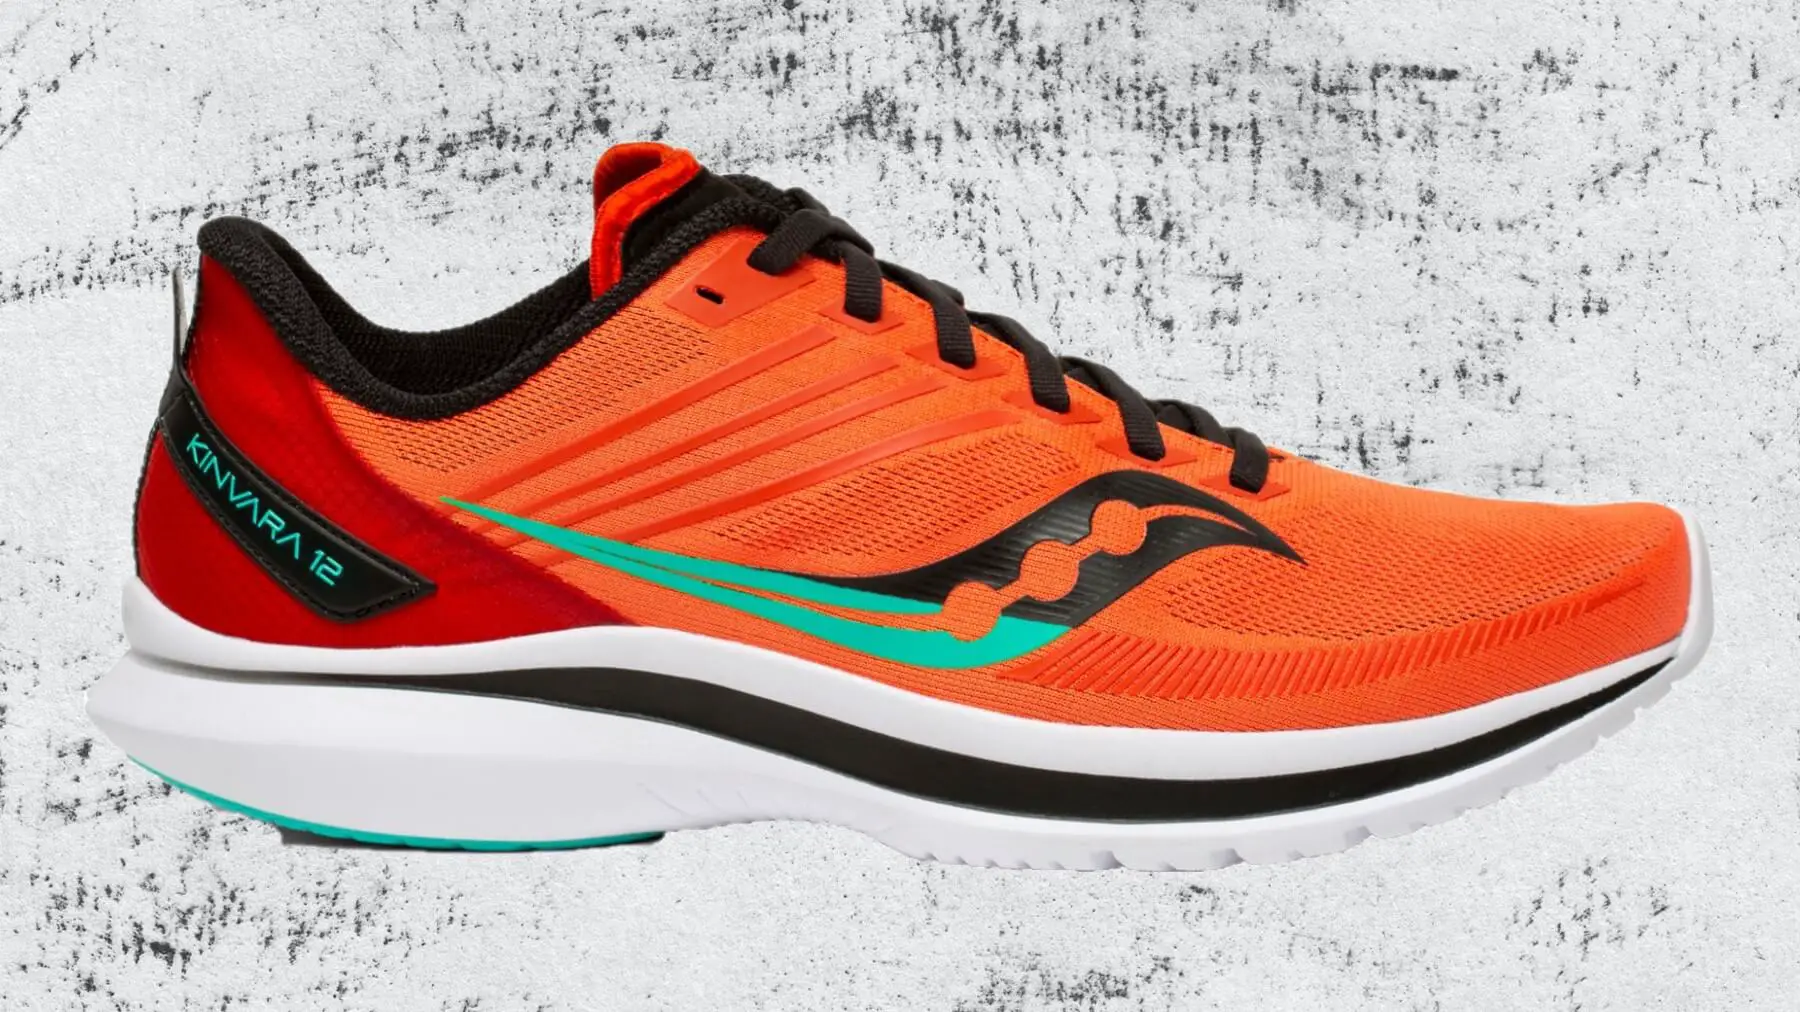 Saucony Kinvara 12 is among the best running shoes for men.